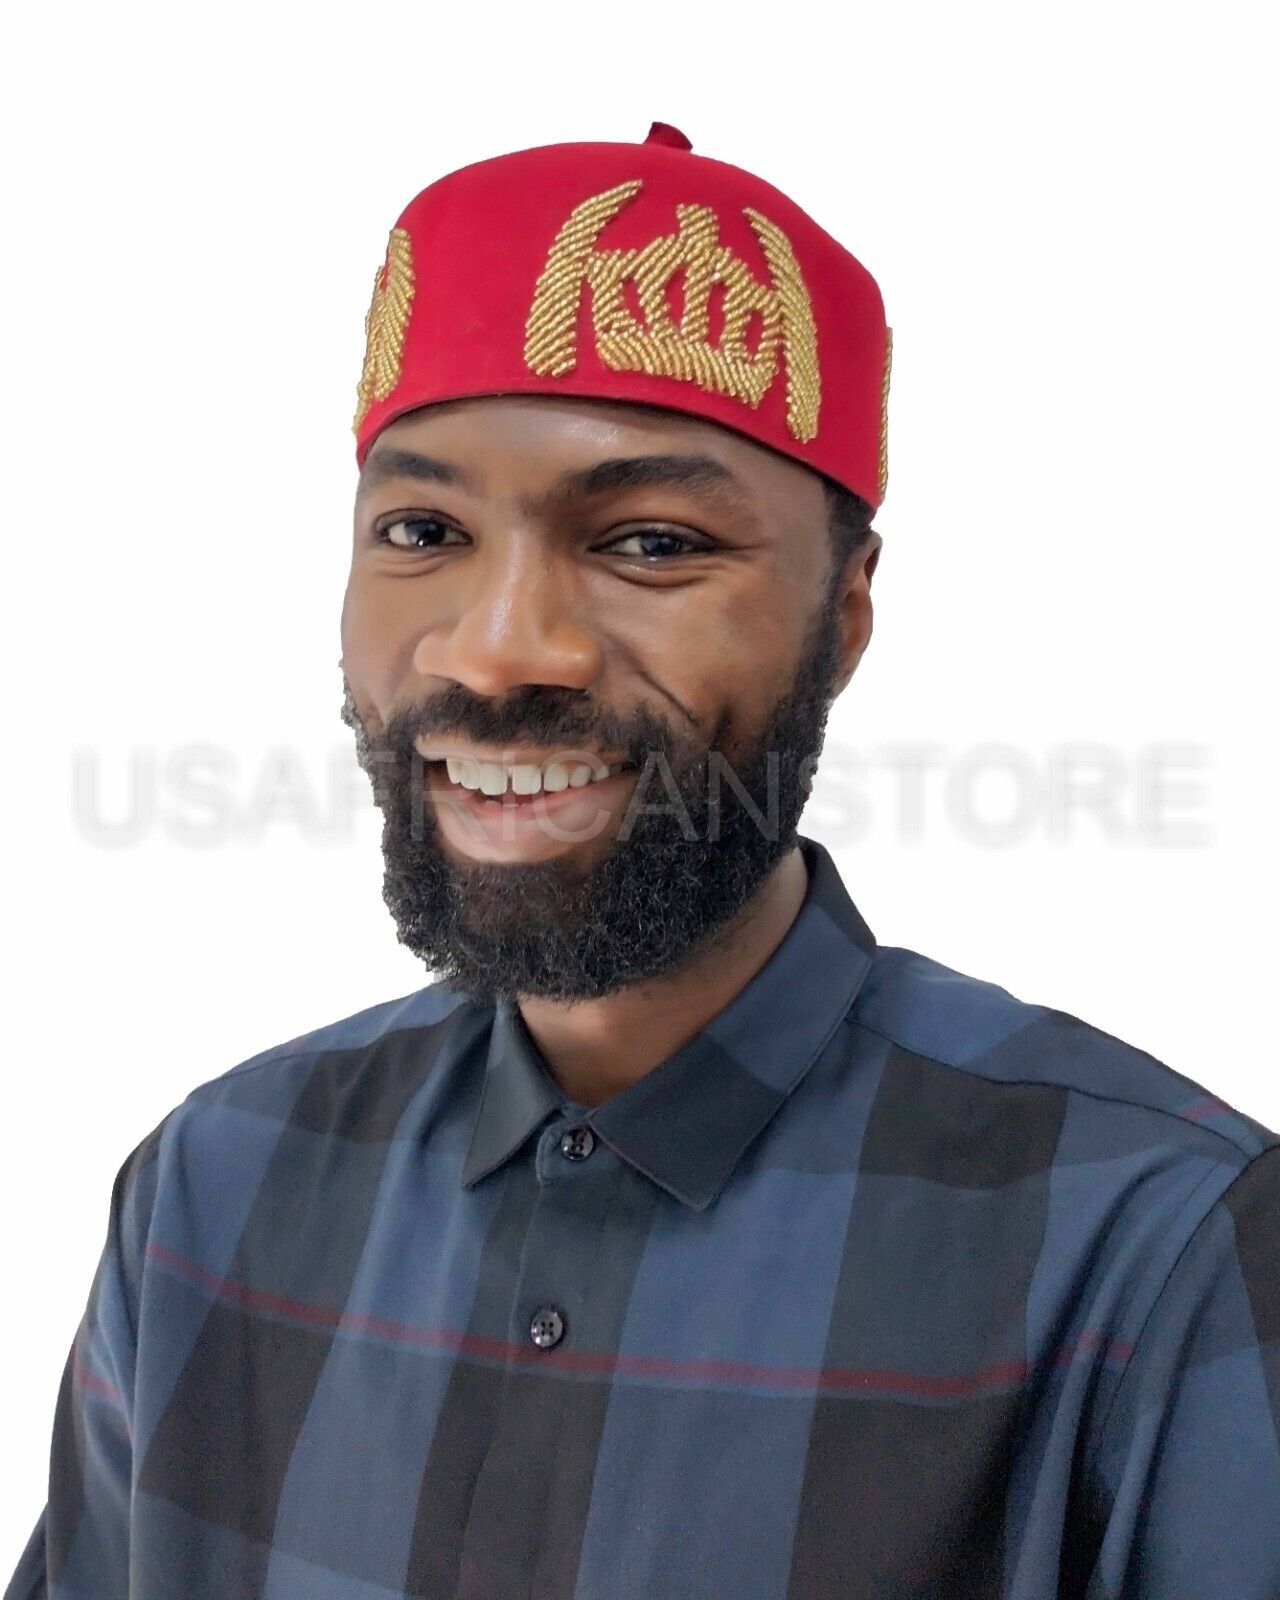 Red High Chief Igbo Cap For Men, Igbo Traditional Red Cap, High Chieftaincy